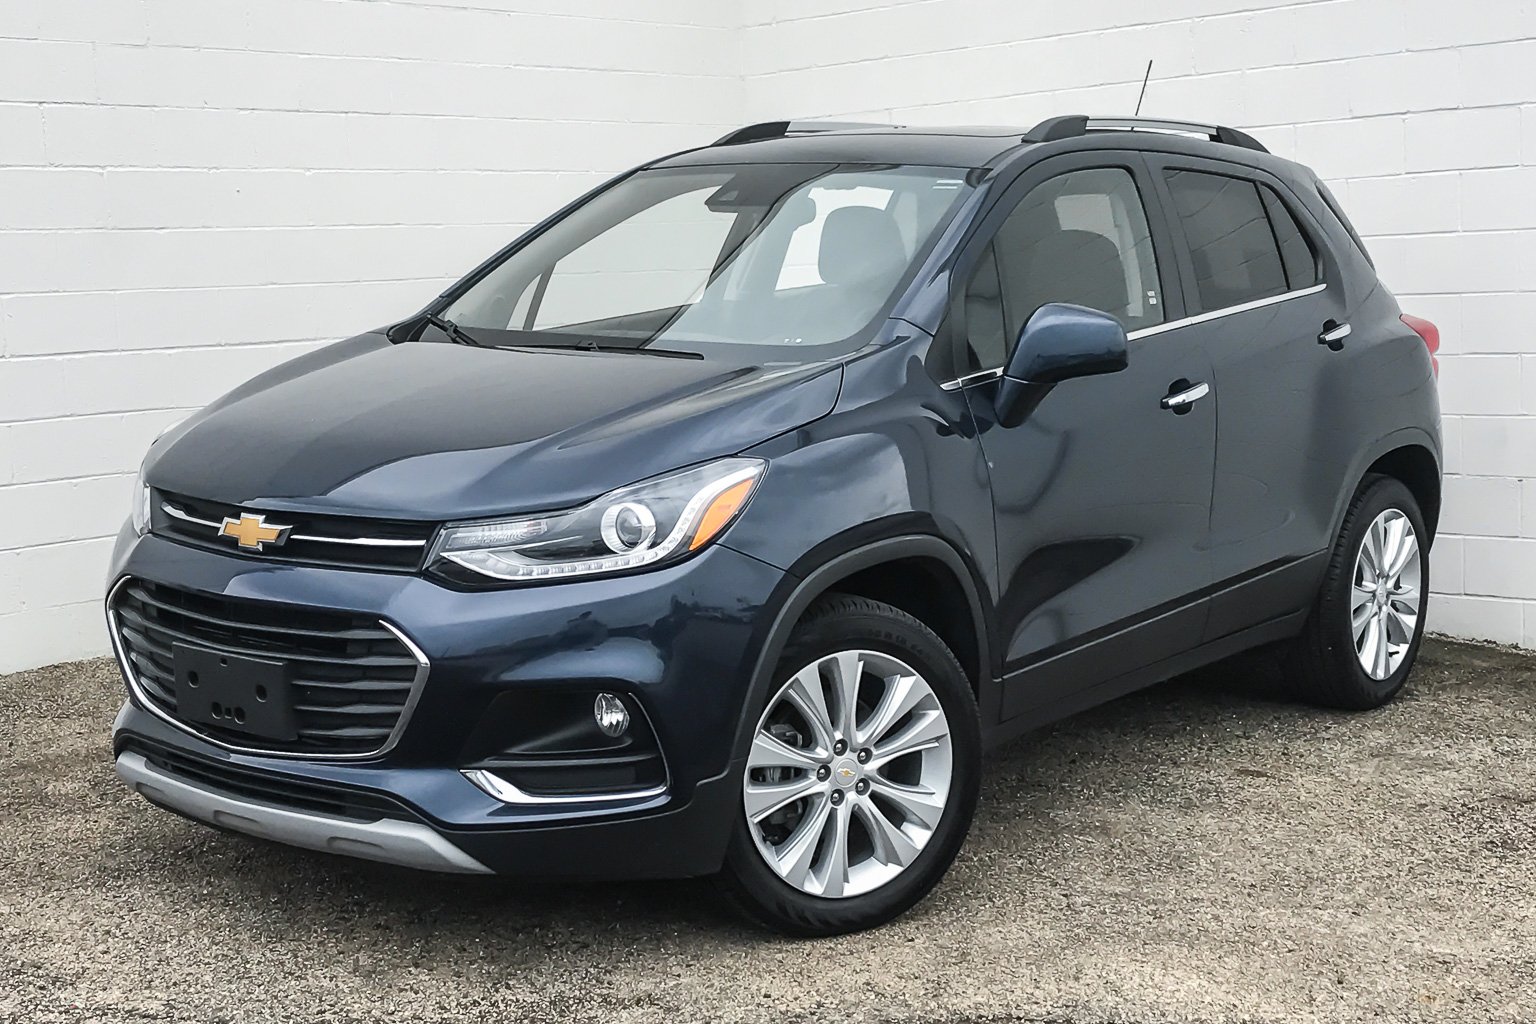 2018 chevy trax problems